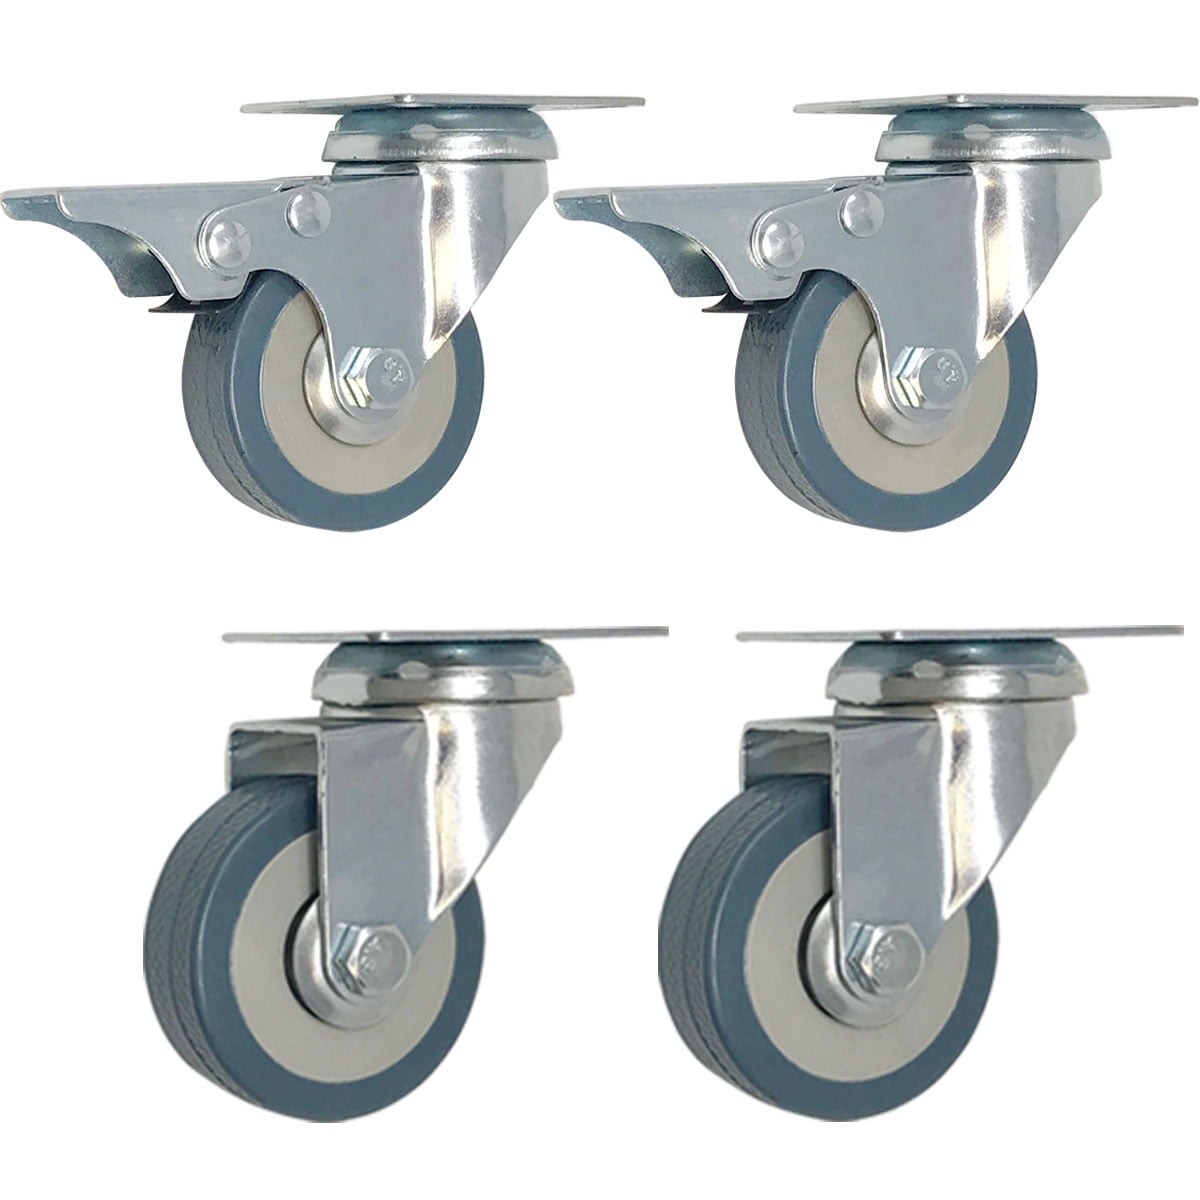 Details about   4 Inch Plate Swivel Casters Wheels 1800lbs Heavy Duty With Brake Polyurethane Of 